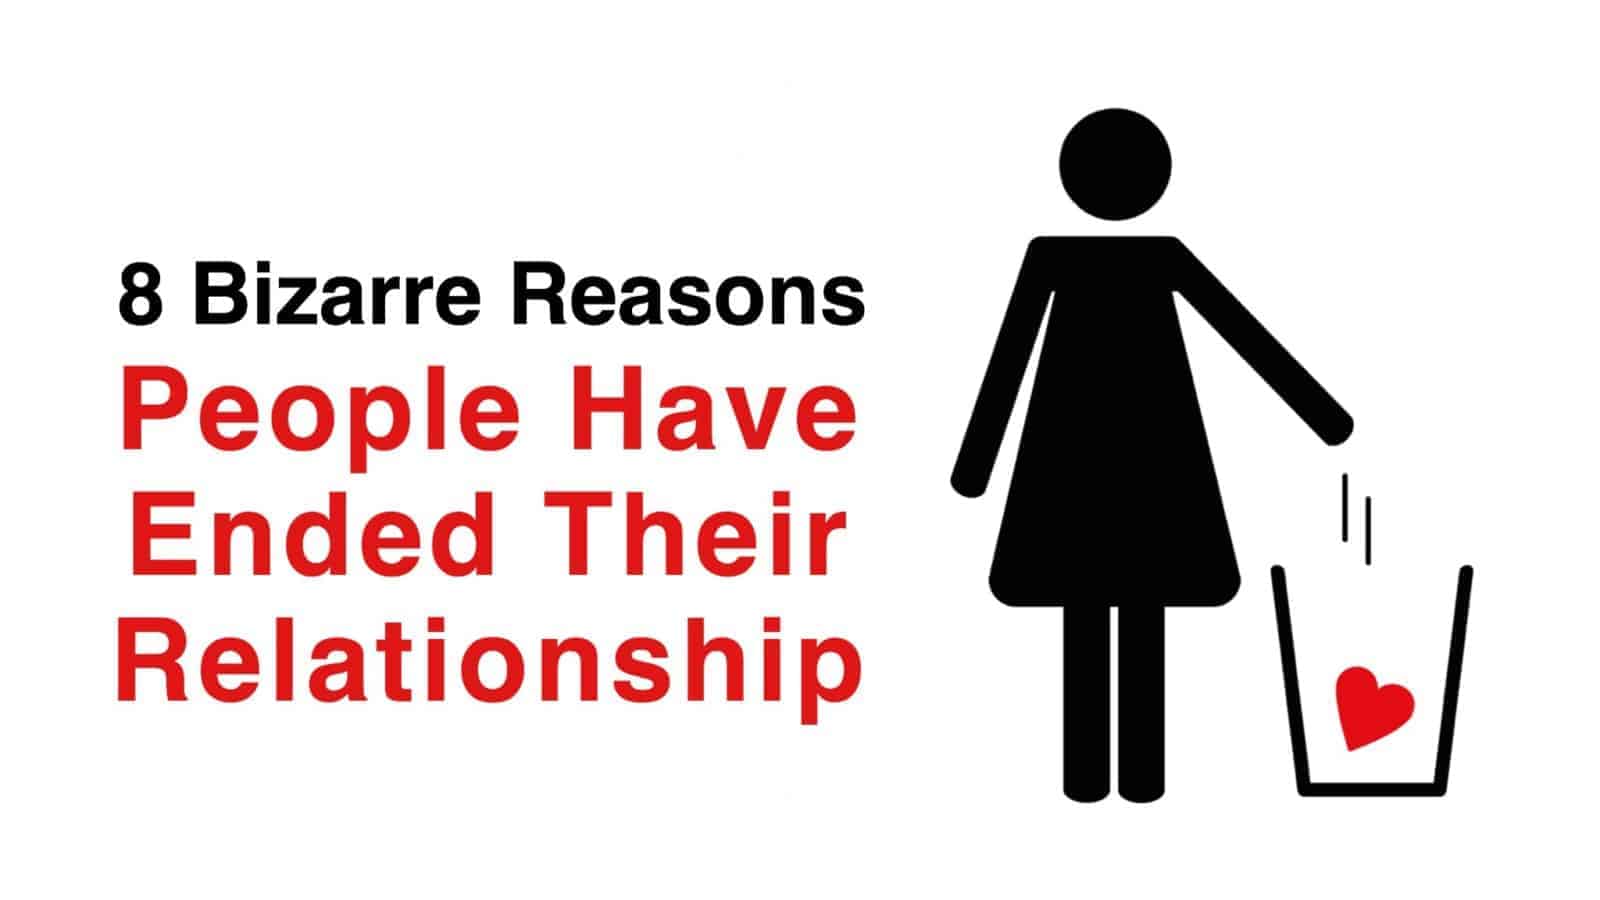 8 Bizarre Reasons People Have Ended Their Relationship